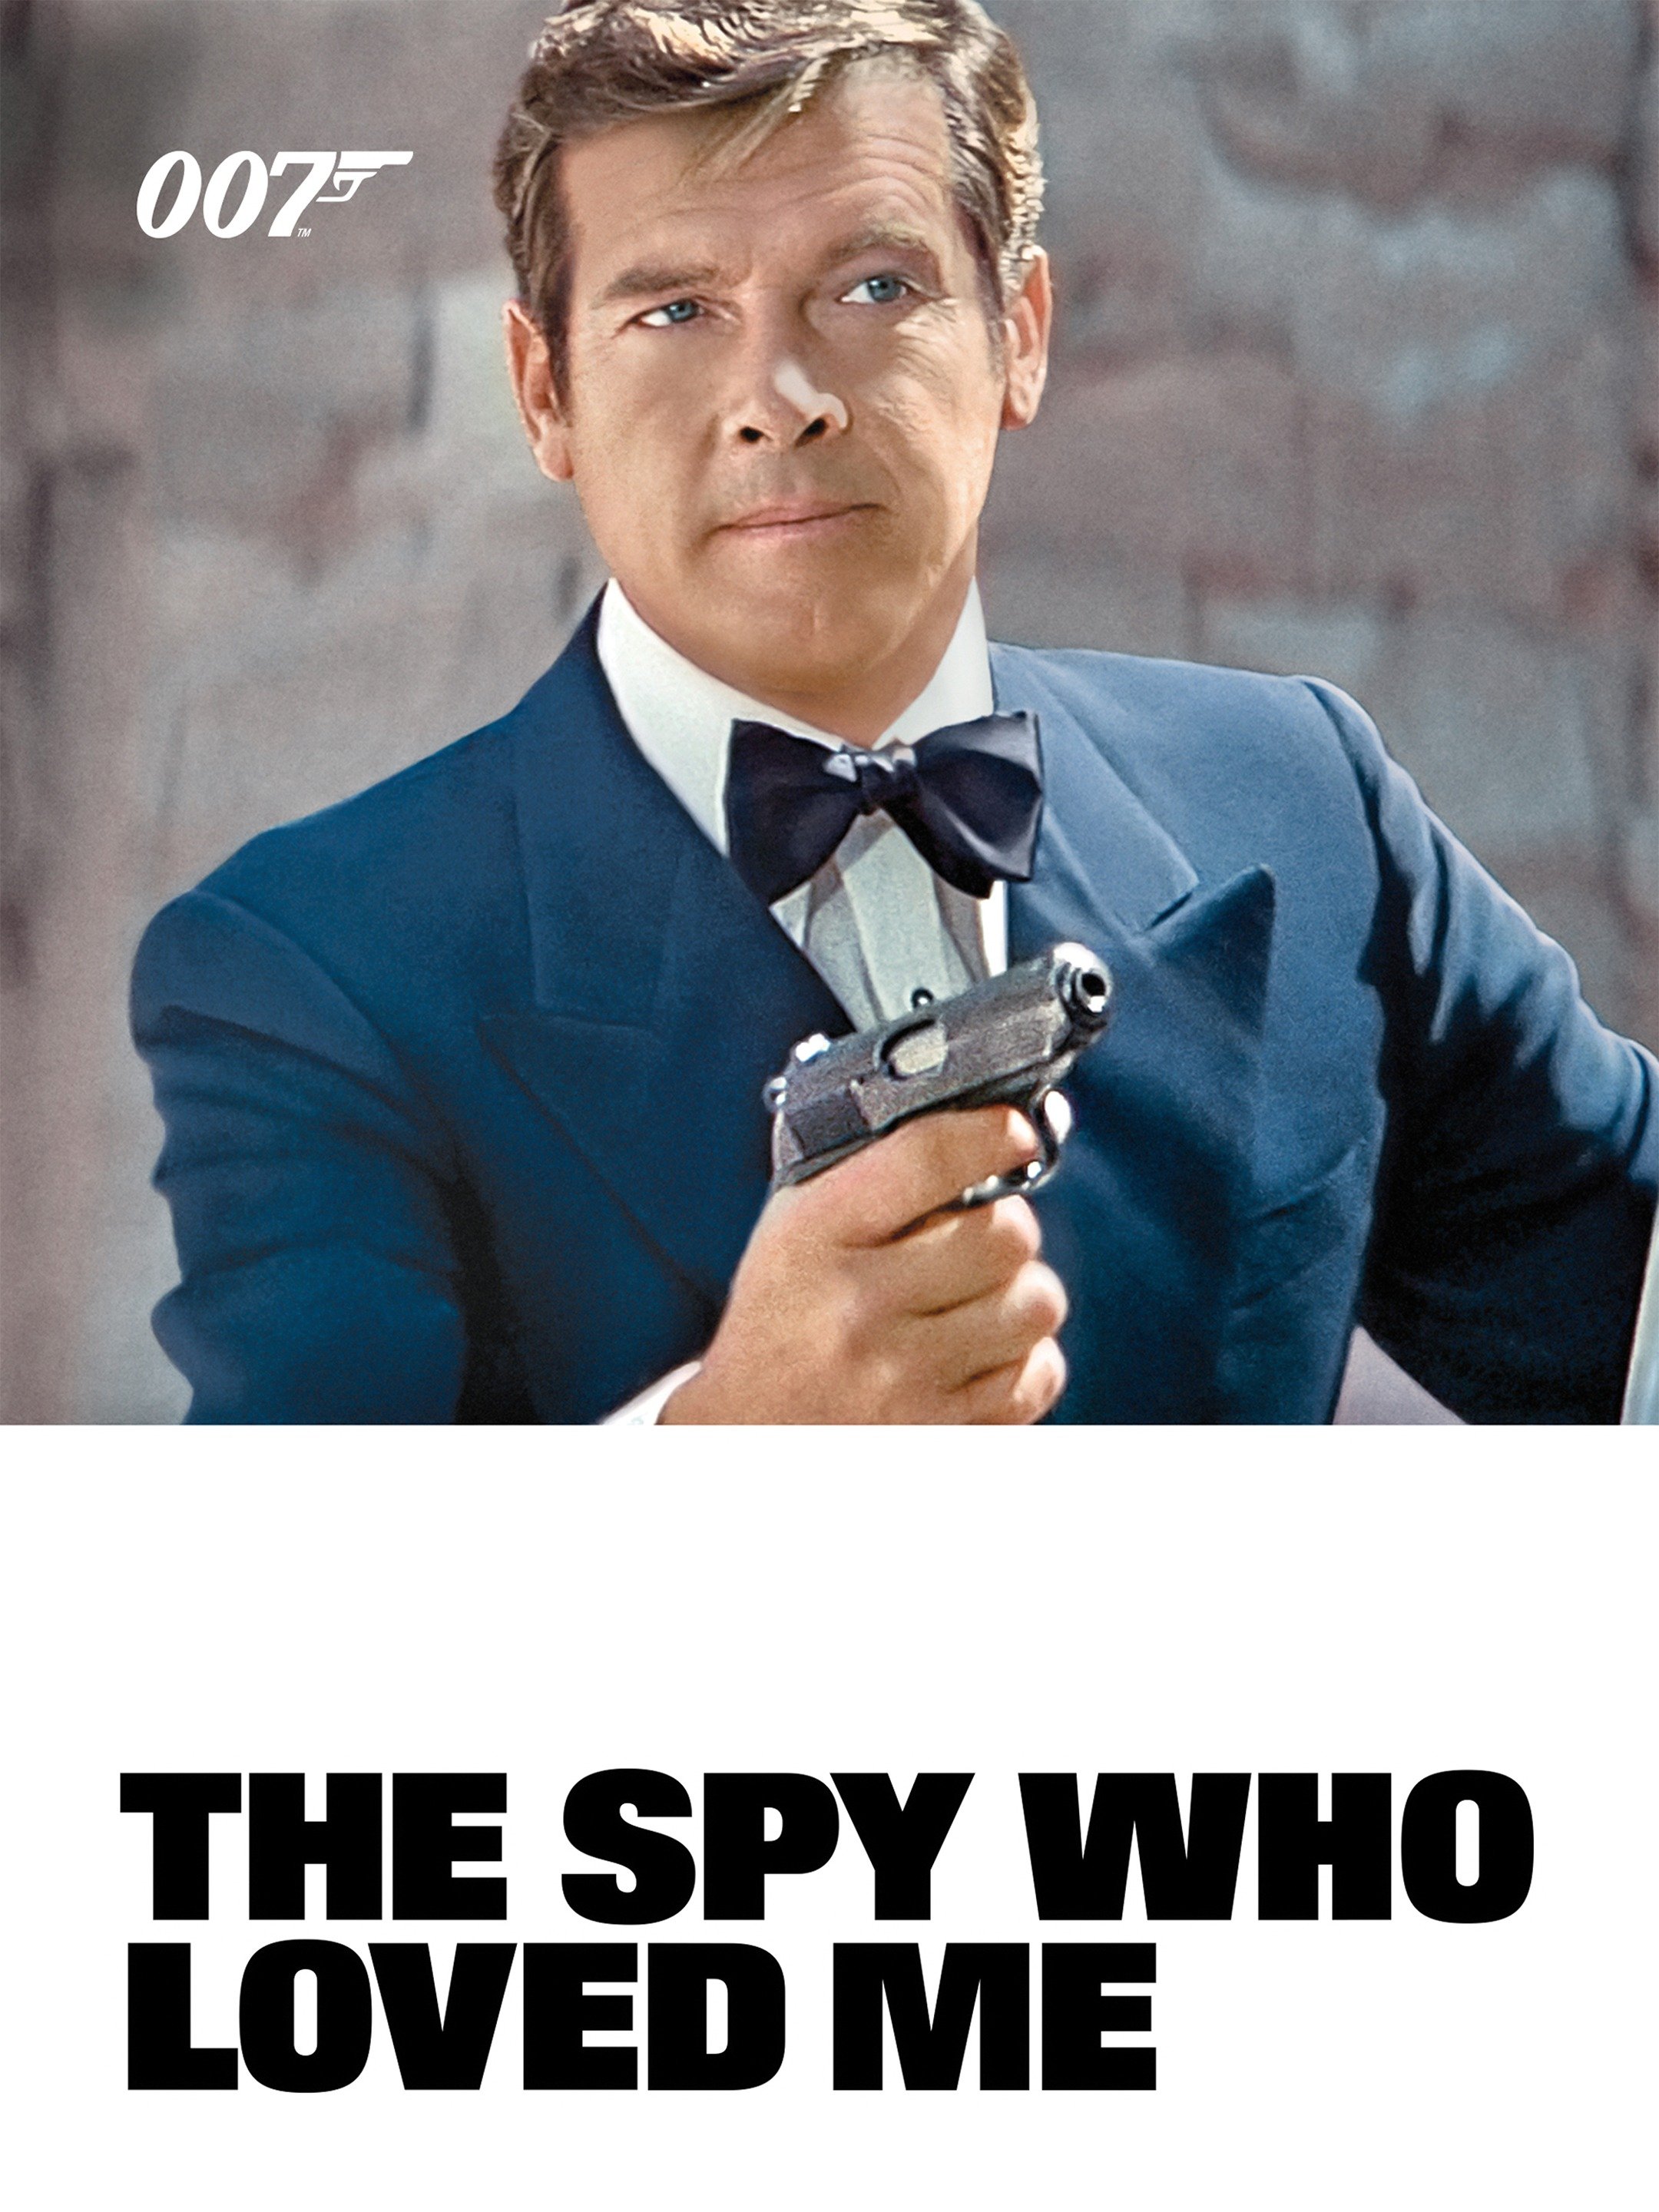 why does the movie spy have an r rating